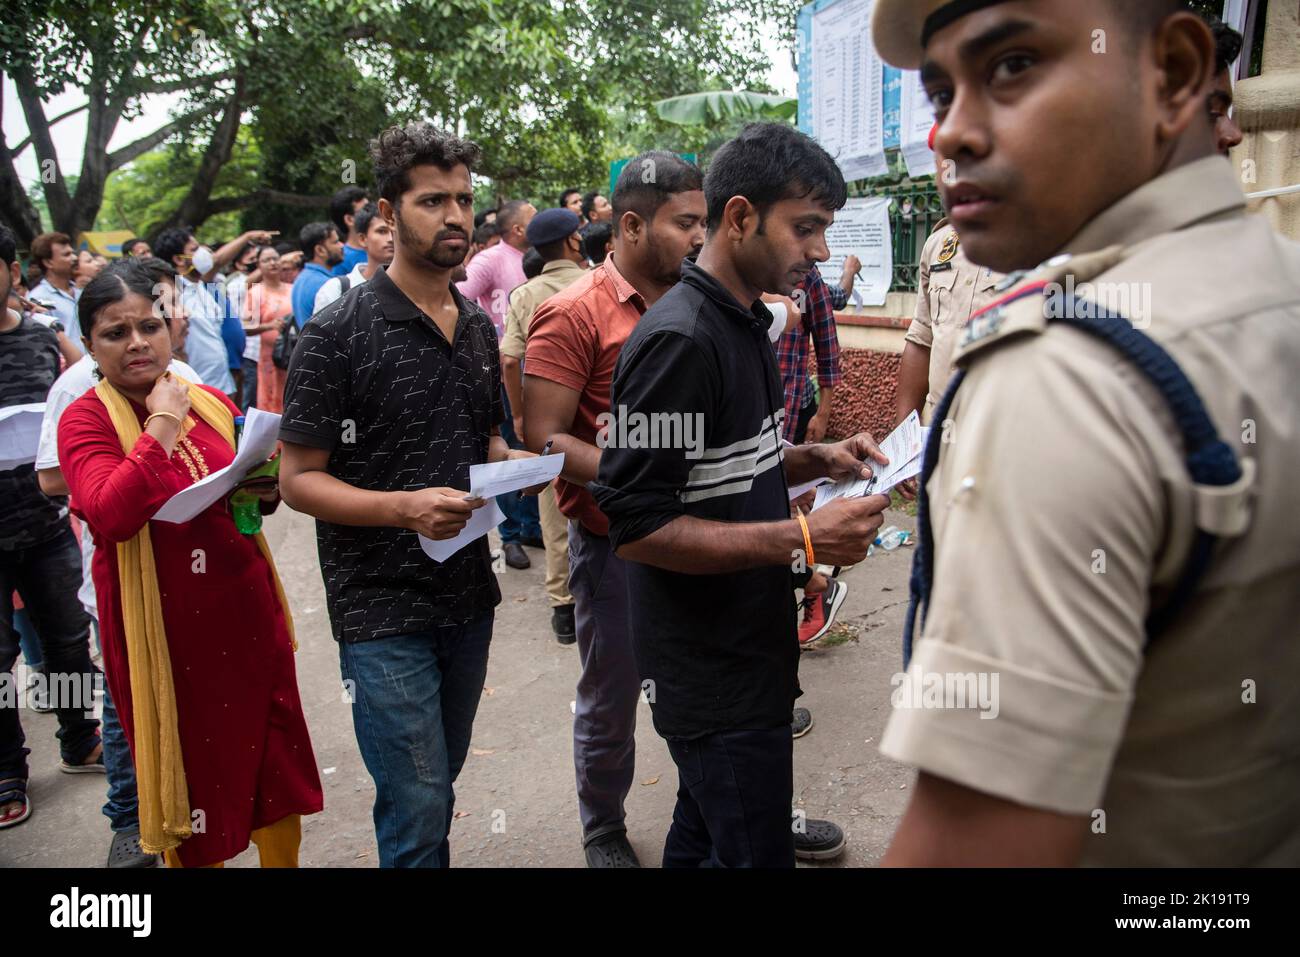 GUWAHATI, INDIA - AUGUST 28: Aspirants arrive to appear  in a written examination for Recruitment of Class III and IV posts, at a examination centre on August 28, 2022 in  Guwahati, India. More than 1.4 million candidates are expected to appear for nearly 30,000 Grade-III and -IV posts in Assam. Mobile internet services across 25 districts of Assam have been suspended during exam in order to prevent possible malpractices. Stock Photo